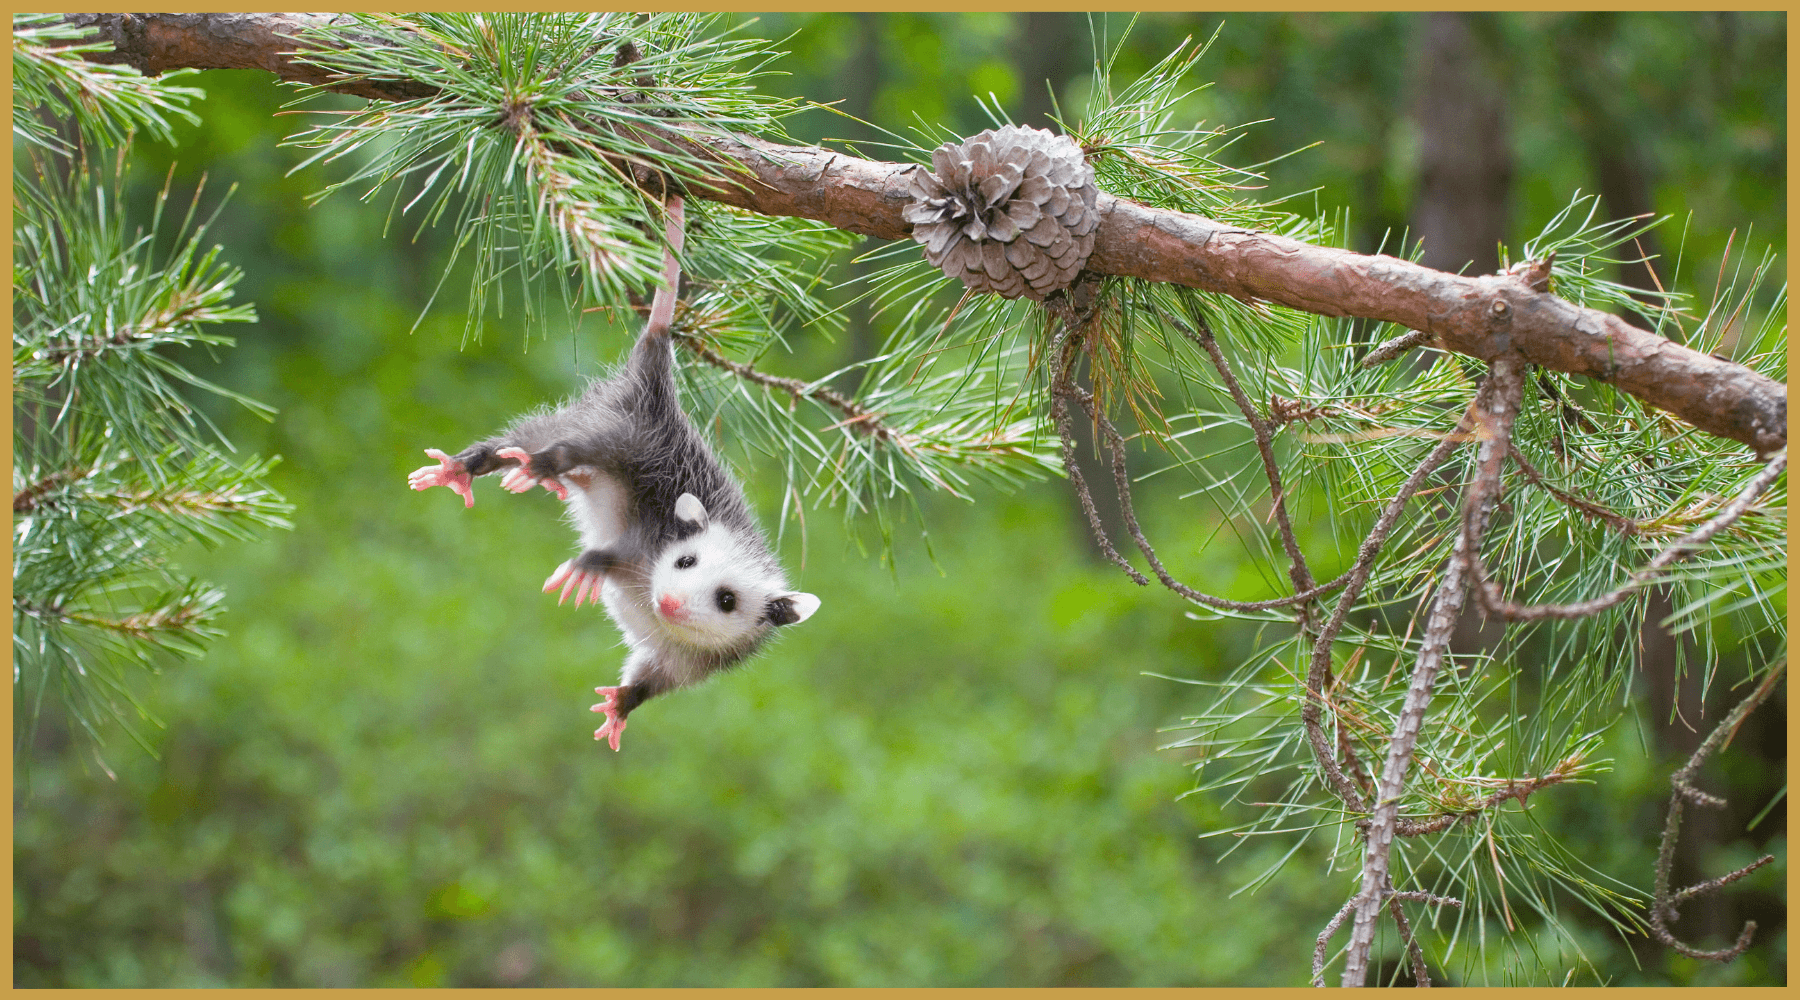 5 reasons the opossum should be Appalachia’s official mascot